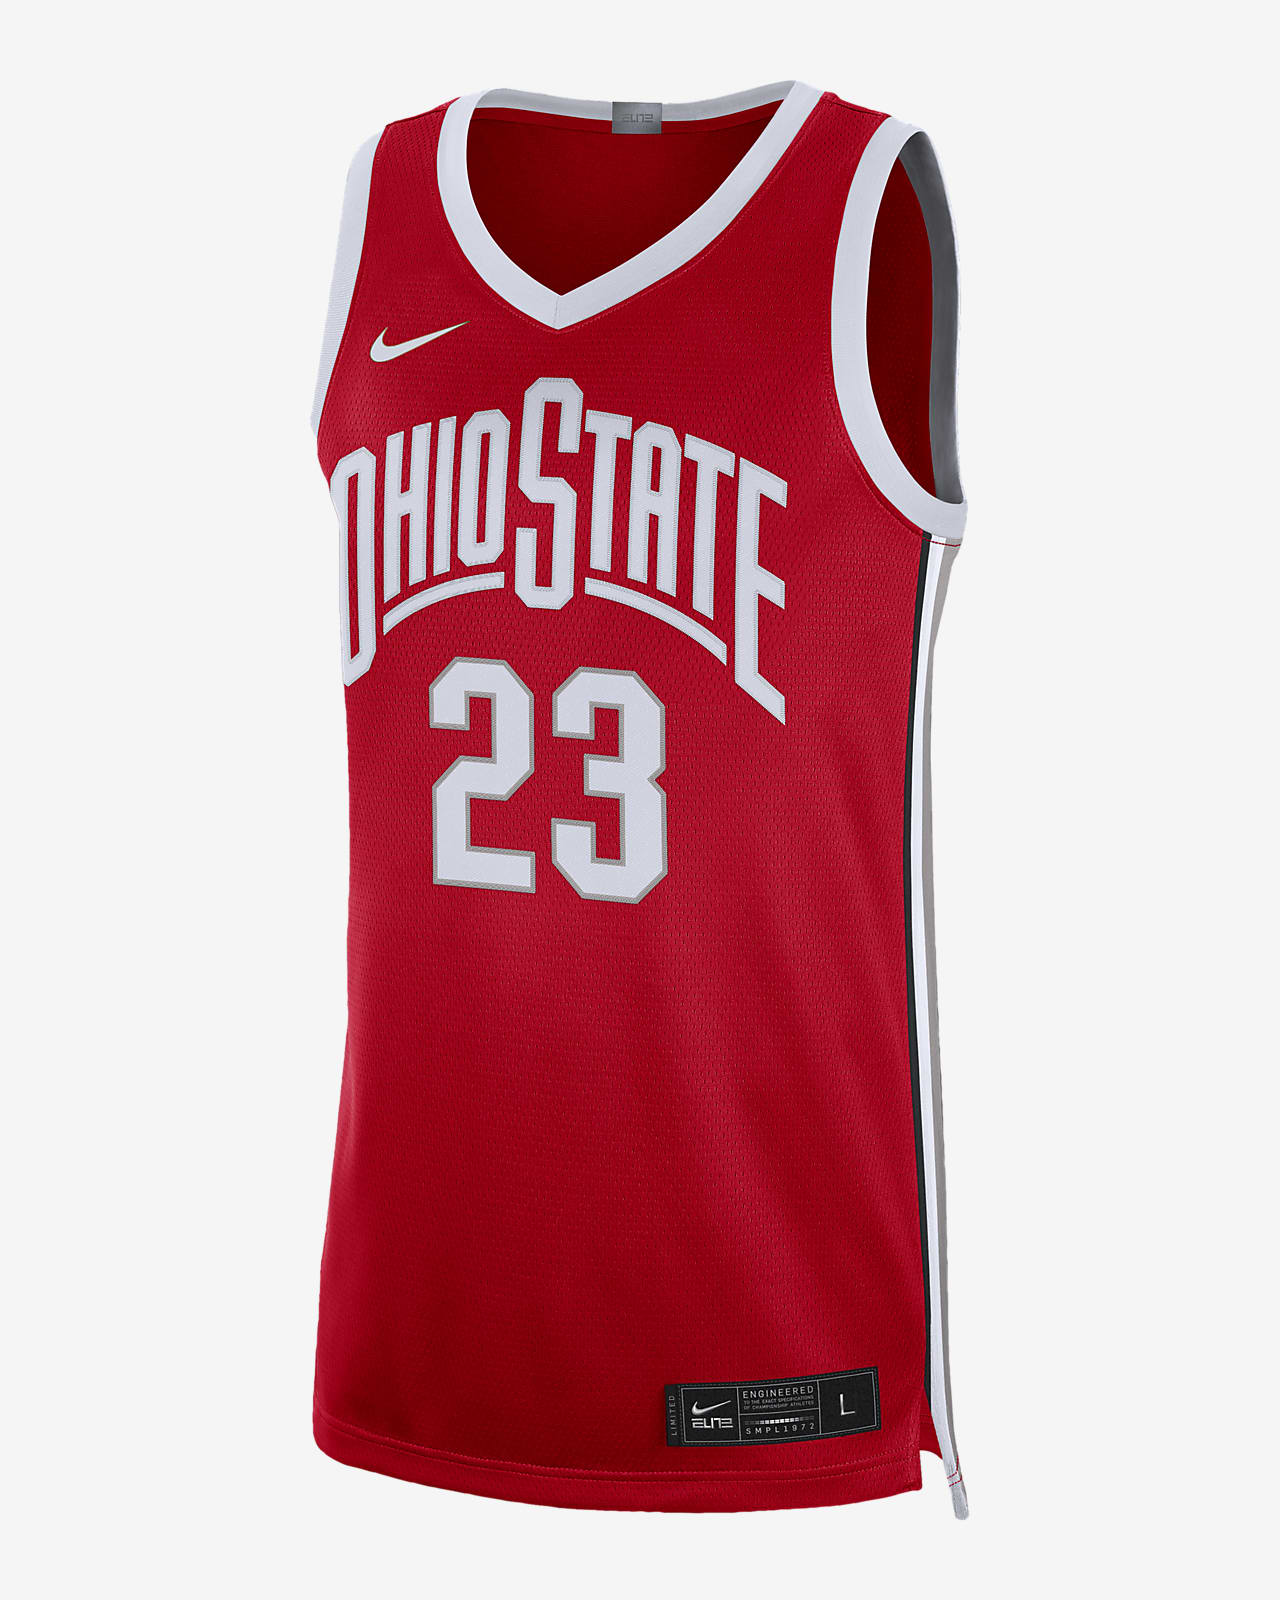 Ohio State Limited Men's Nike Dri-FIT College Basketball Jersey